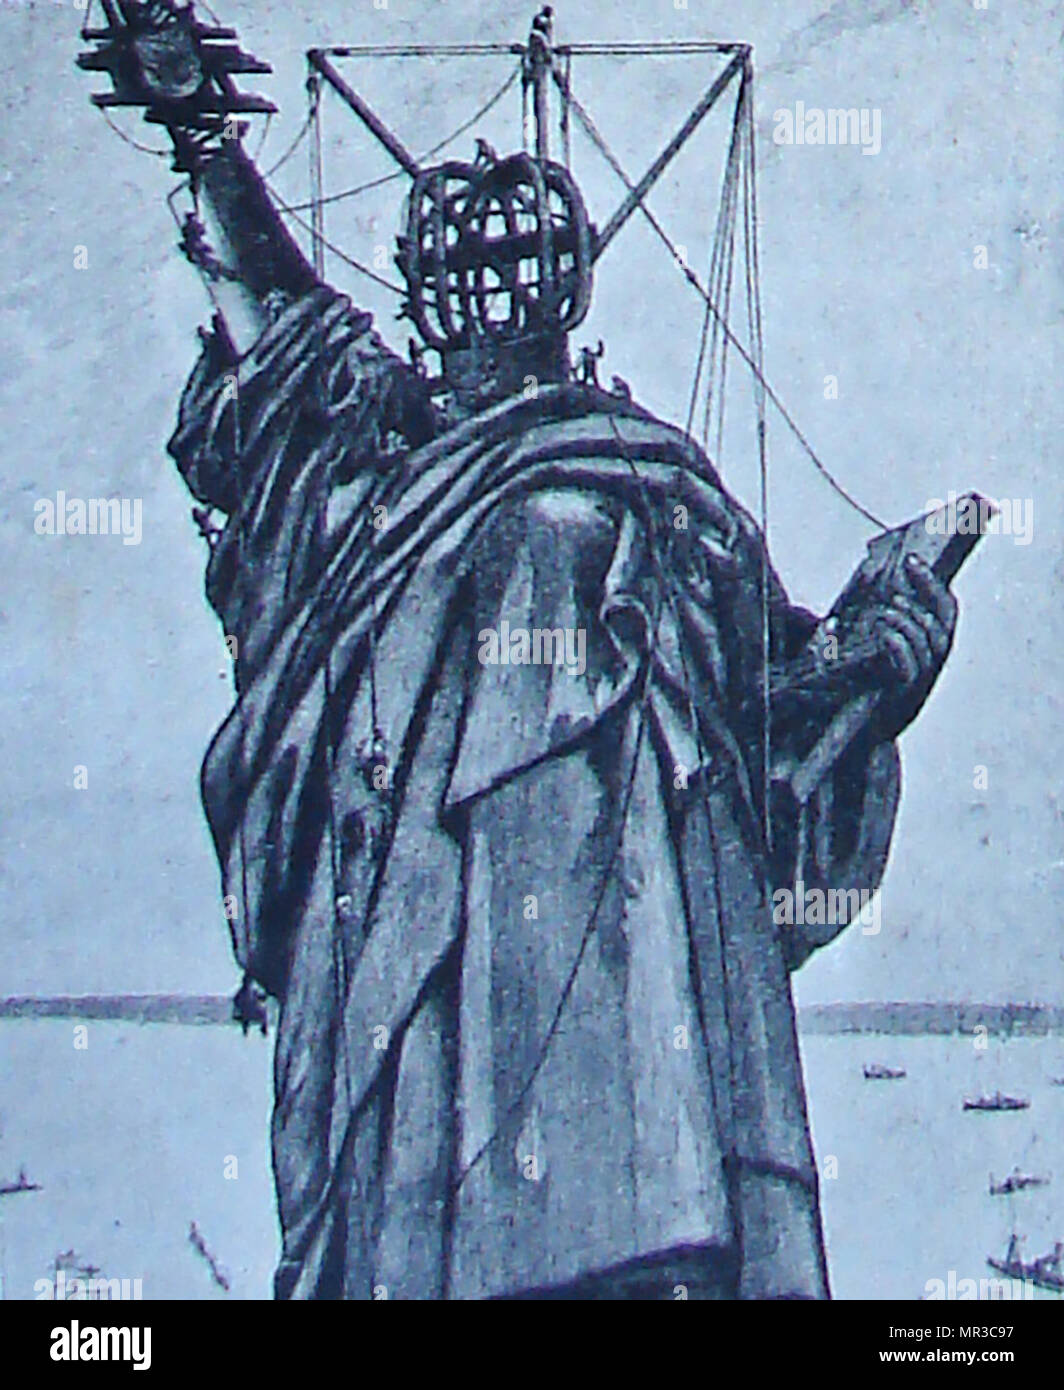 1946 - Statue of Liberty , without its head, being constructed in Paris, France before transportation to the USA - Sculptor Frédéric Auguste Bartholdi, Builder Gustave Eiffel Stock Photo